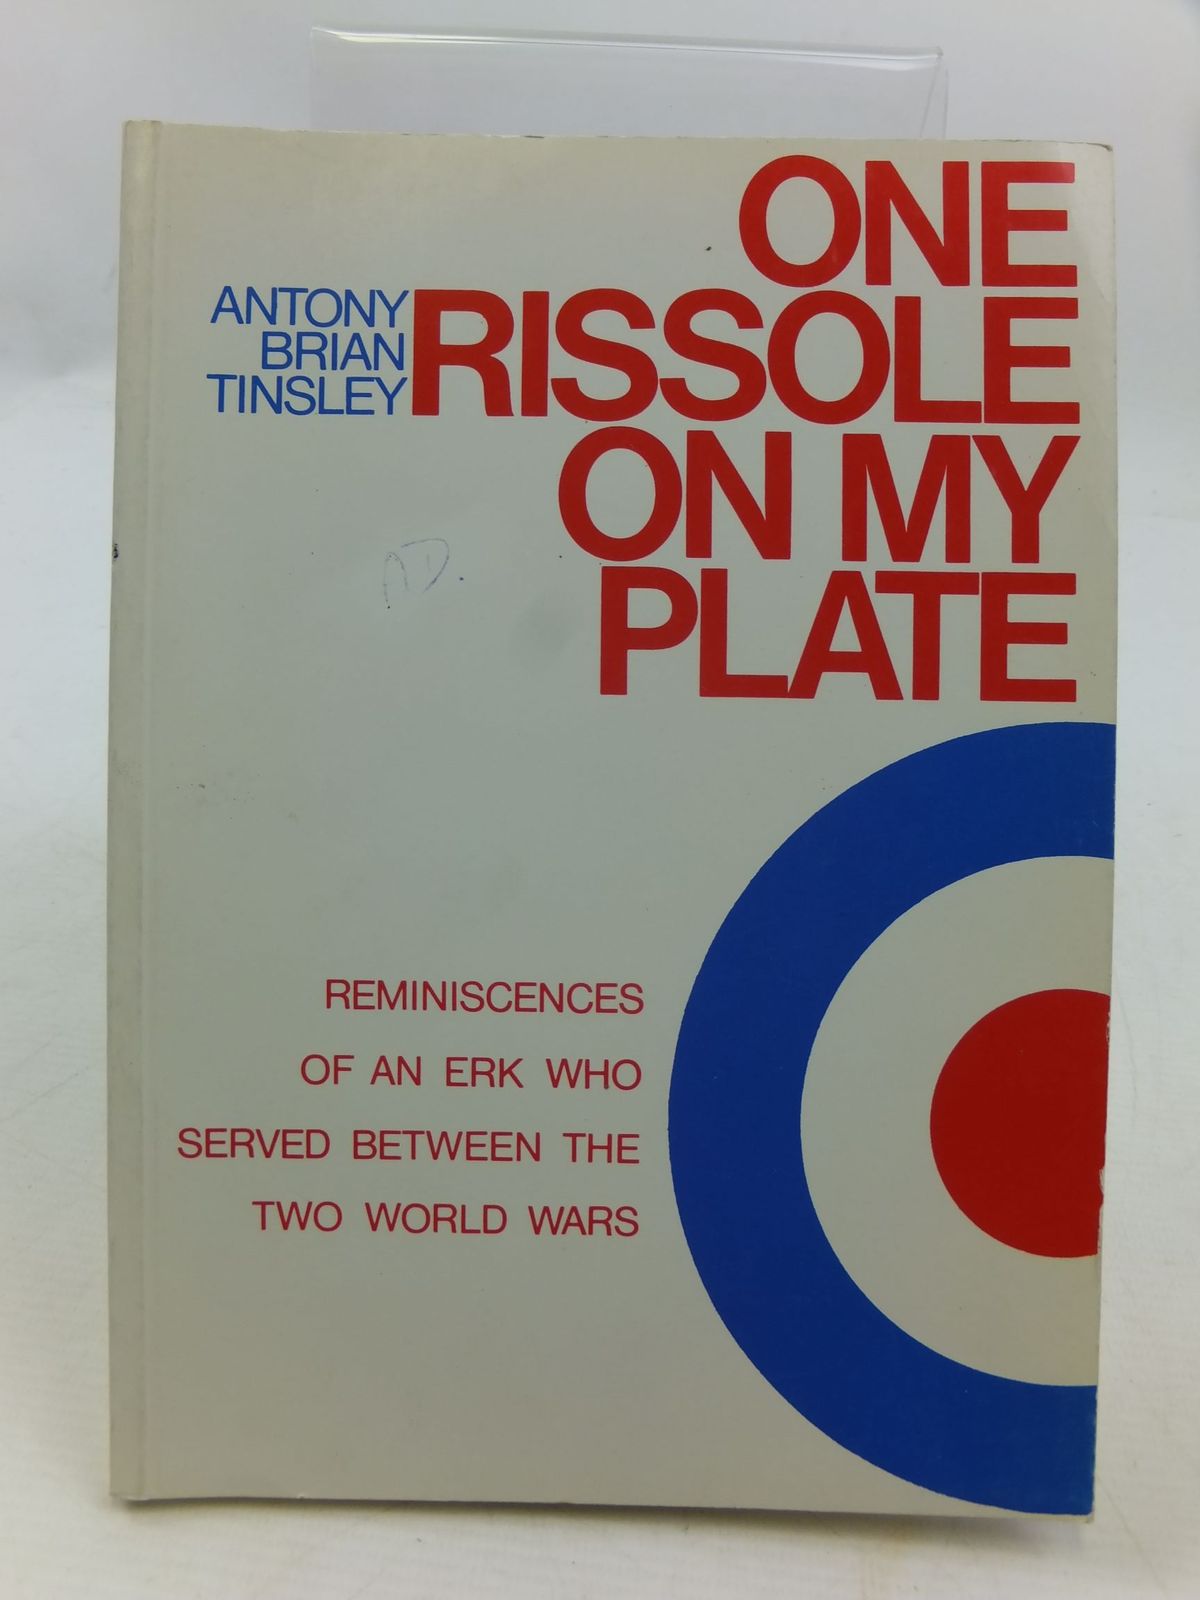 Photo of ONE RISSOLE ON MY PLATE REMINISCENCES OF AN ERK WHO SERVED BETWEEN THE TWO WORLD WARS written by Tinsley, Antony Brian published by Merlin Books Ltd. (STOCK CODE: 1708436)  for sale by Stella & Rose's Books